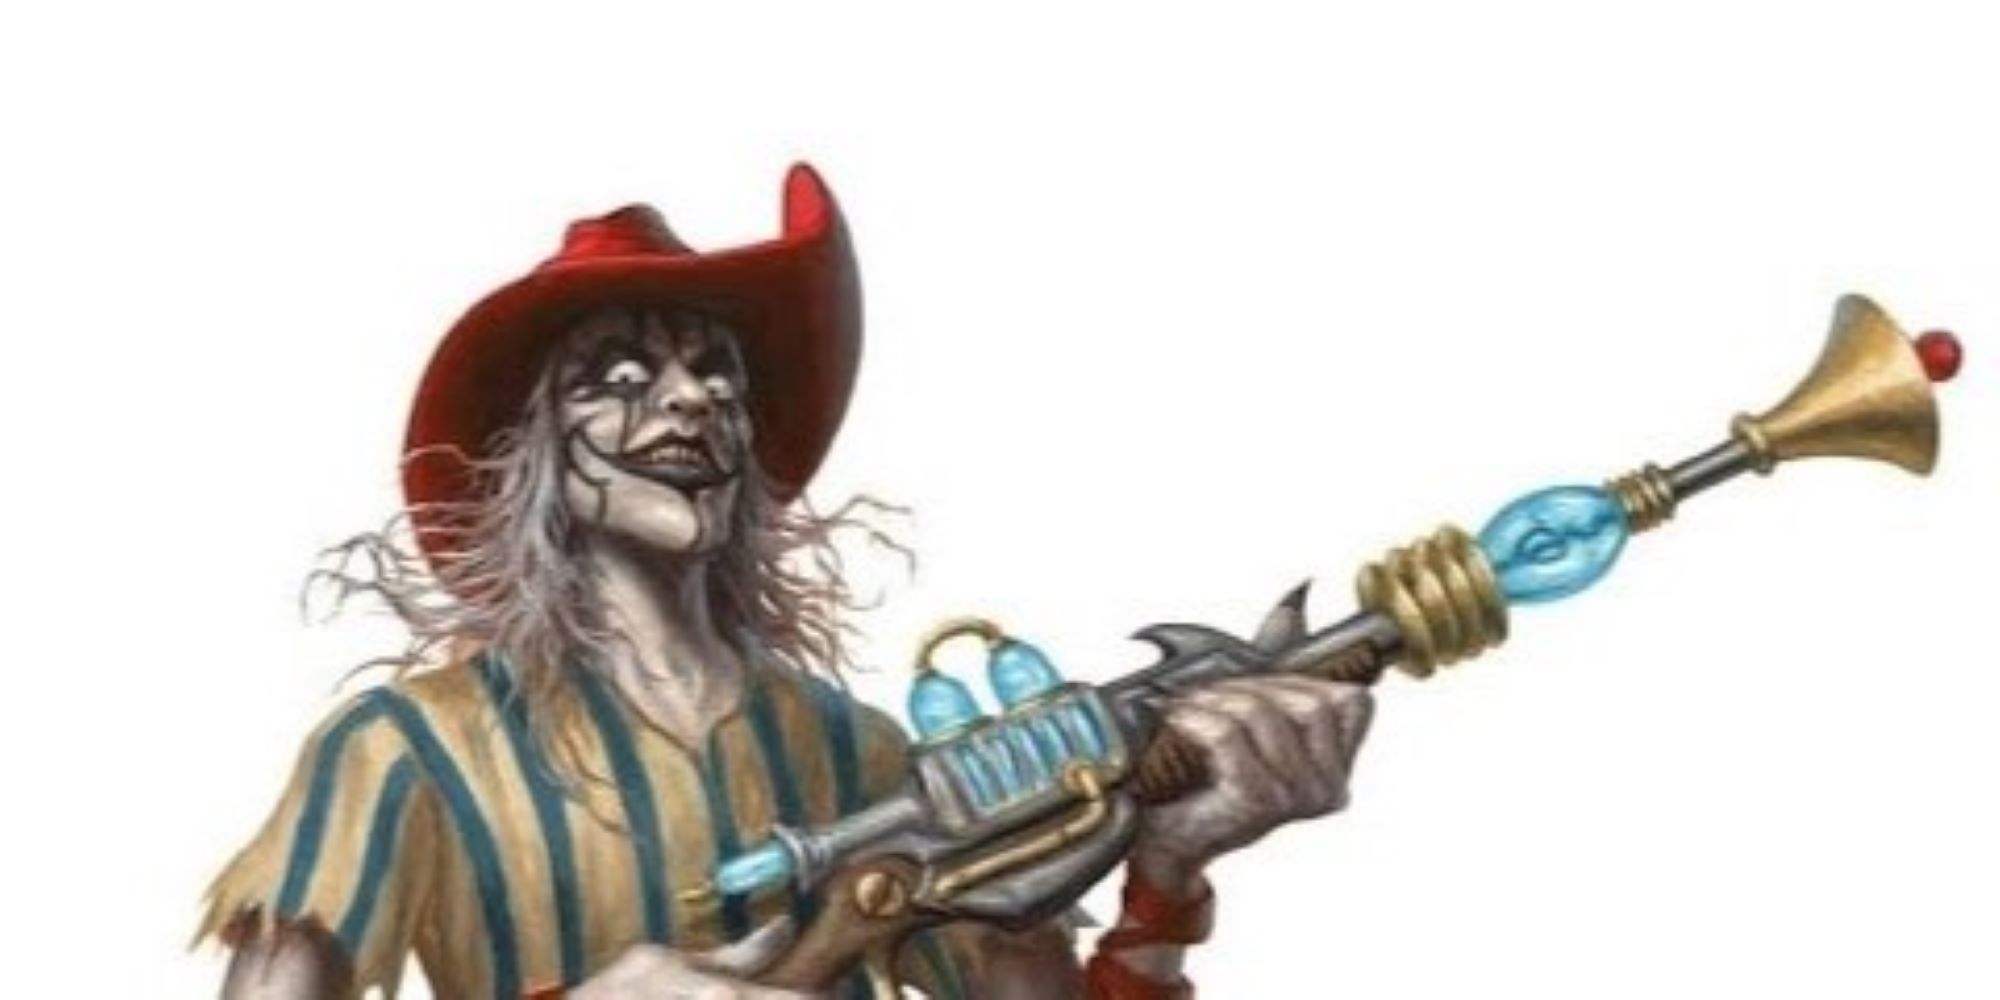 An undead clown grinning while holding a large firearm